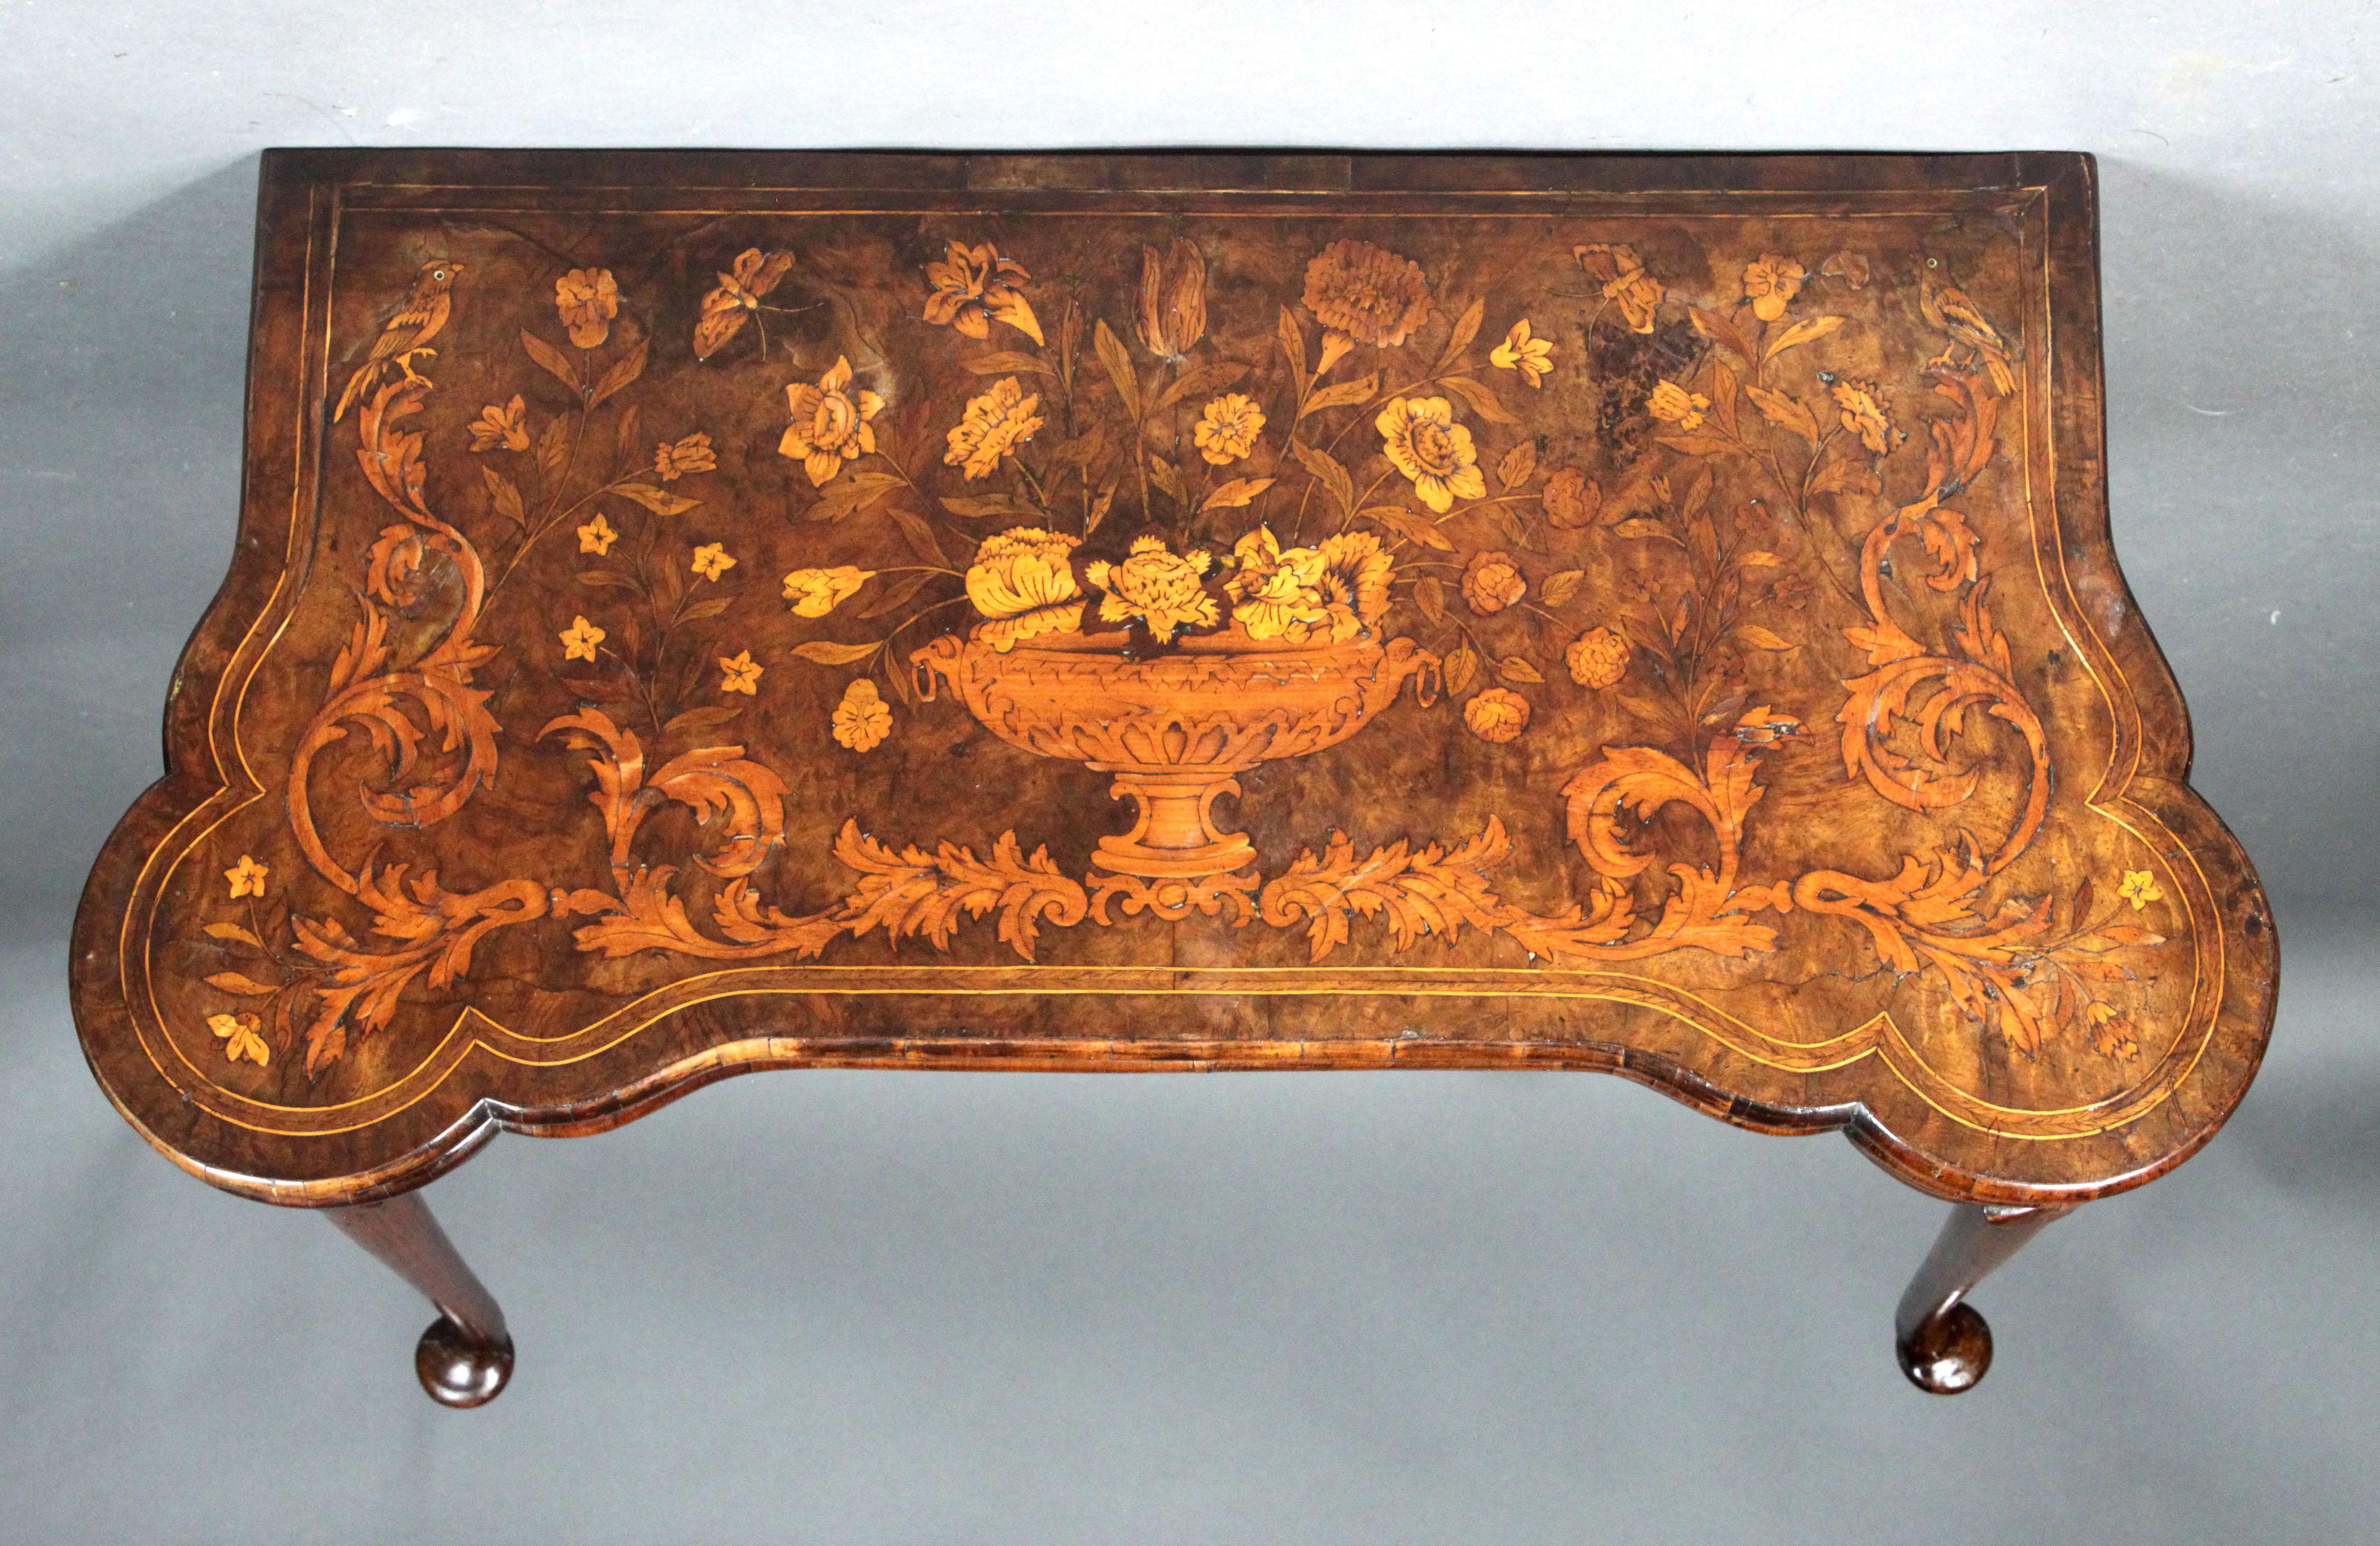 Dutch Marquetry Card Table In Good Condition For Sale In Bradford-on-Avon, Wiltshire